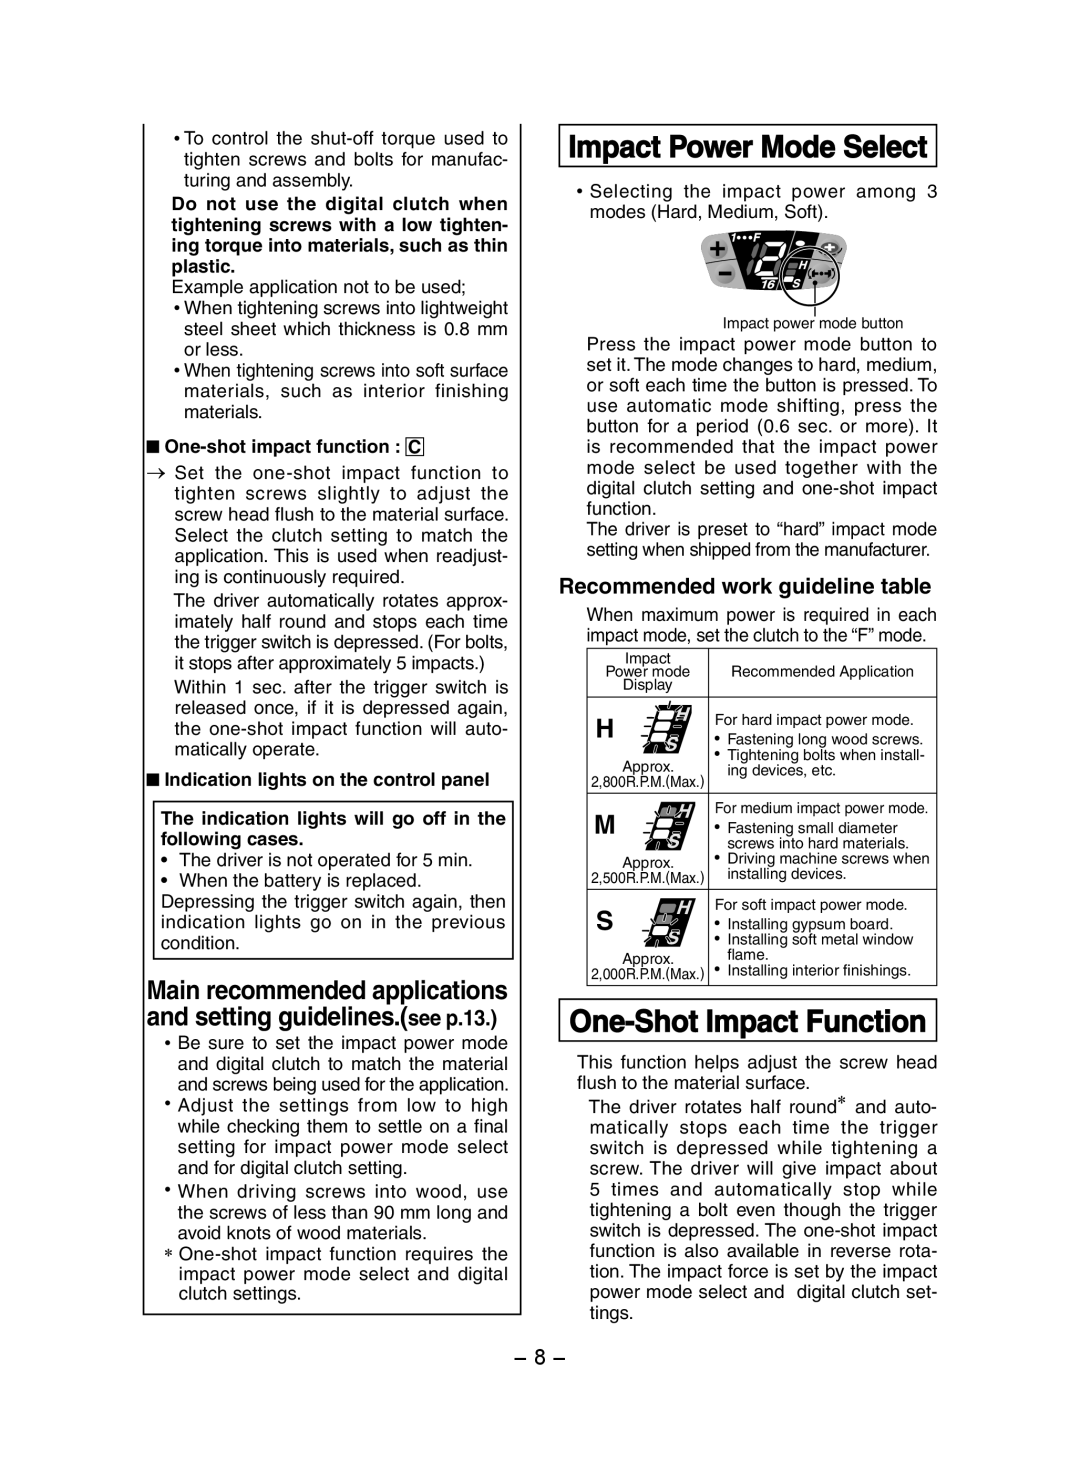 Panasonic EY7202 Impact Power Mode Select, One-Shot Impact Function, Recommended work guideline table 